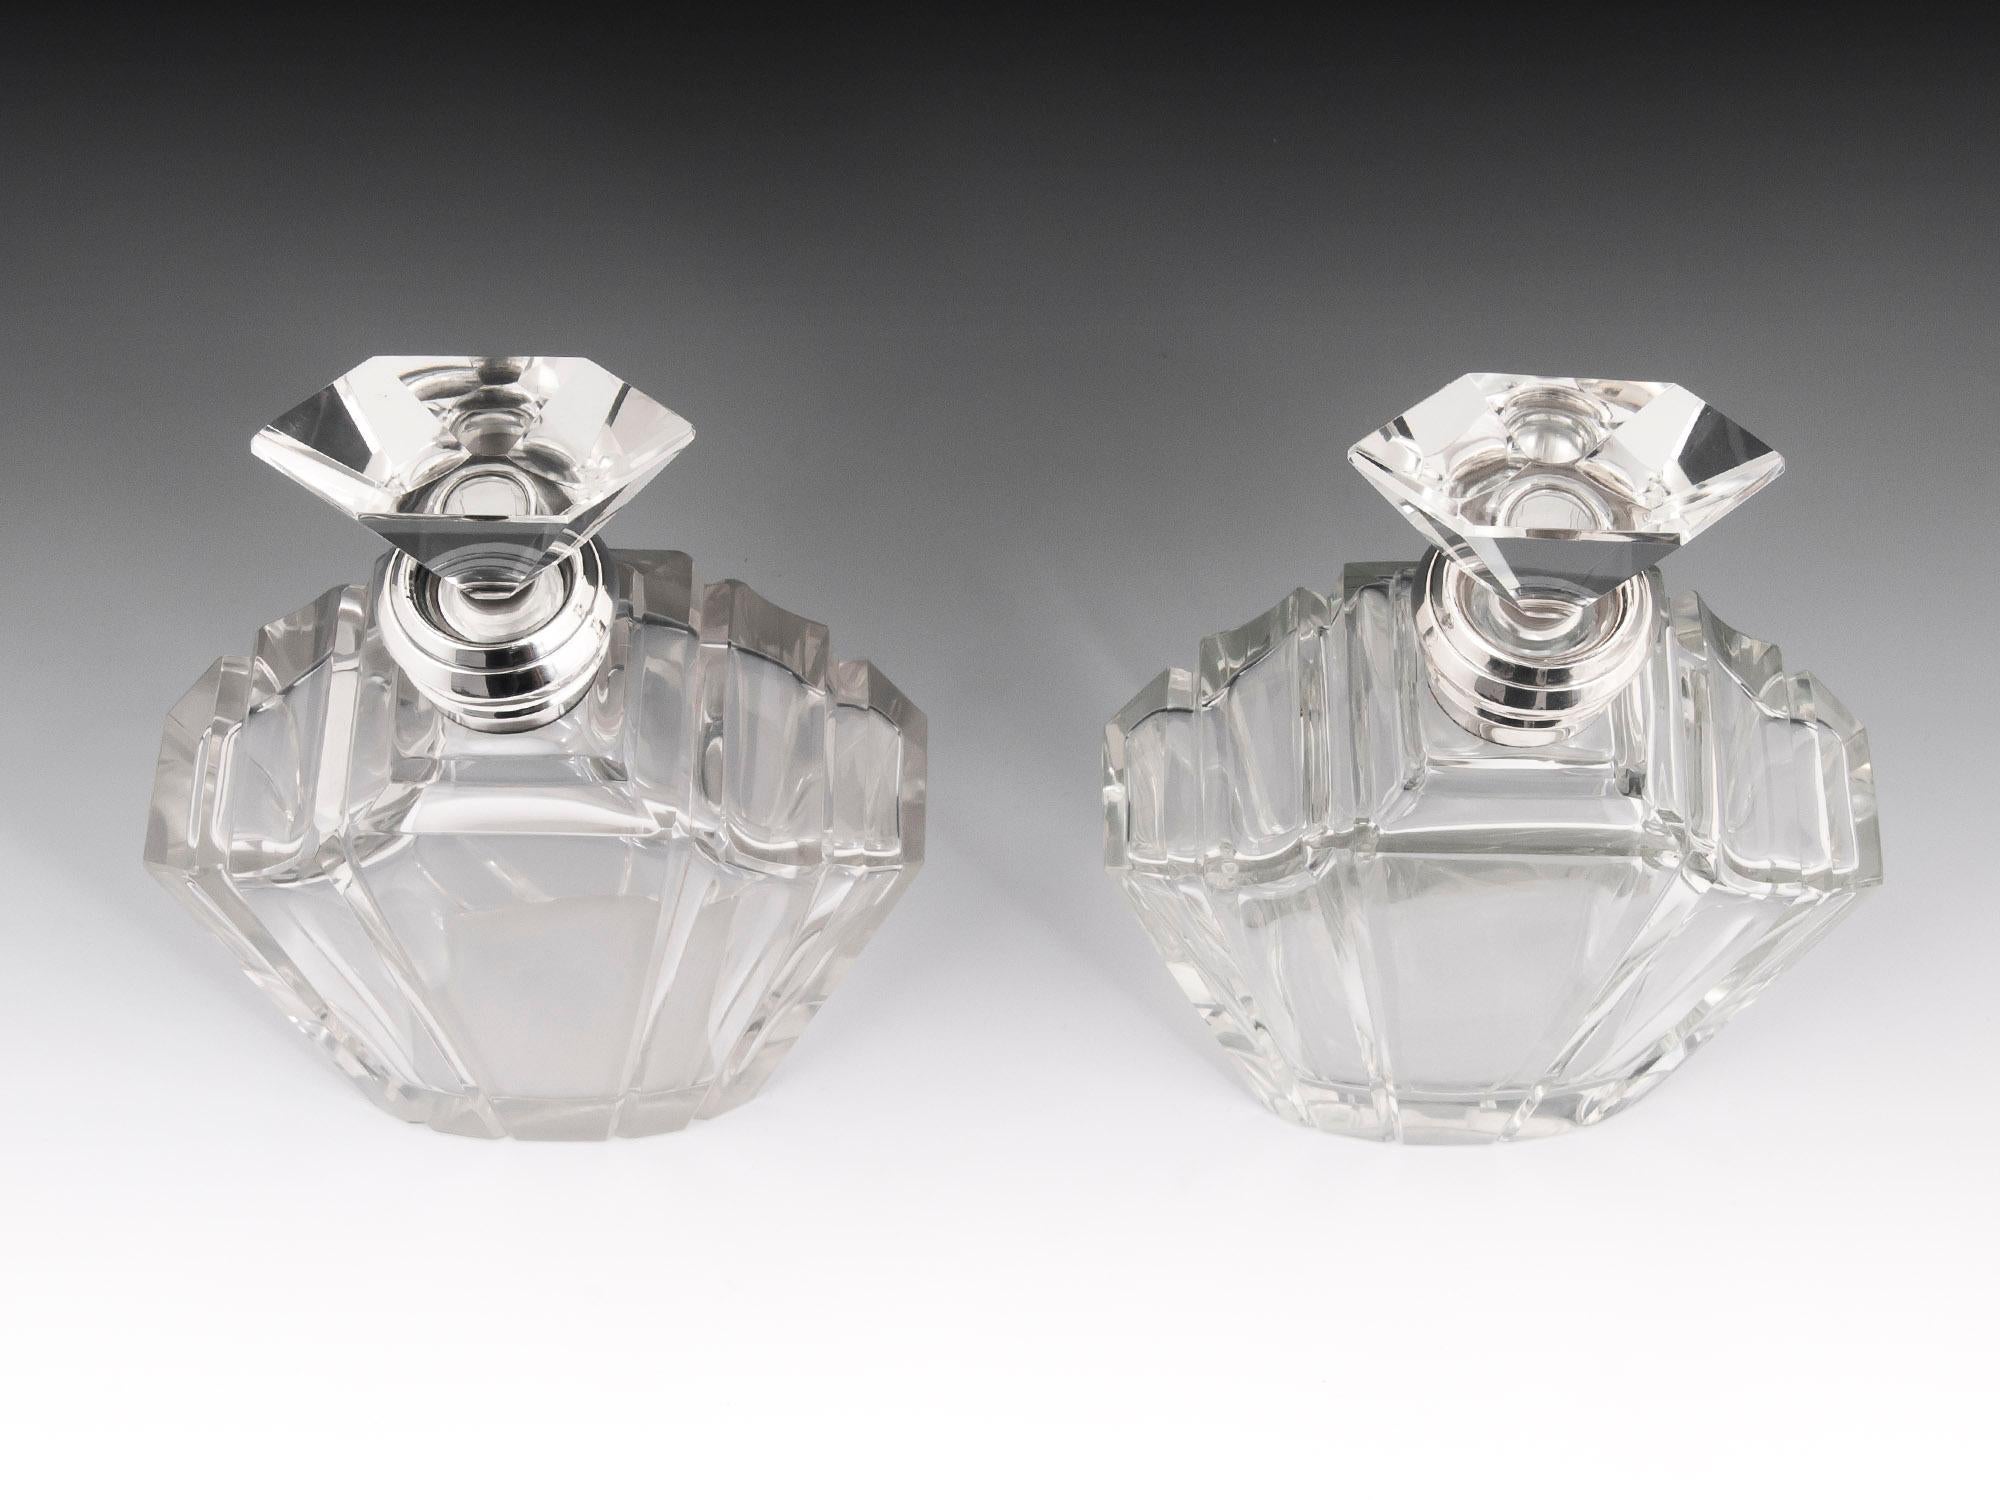 British Matched Pair of Art Deco Silver Decanters